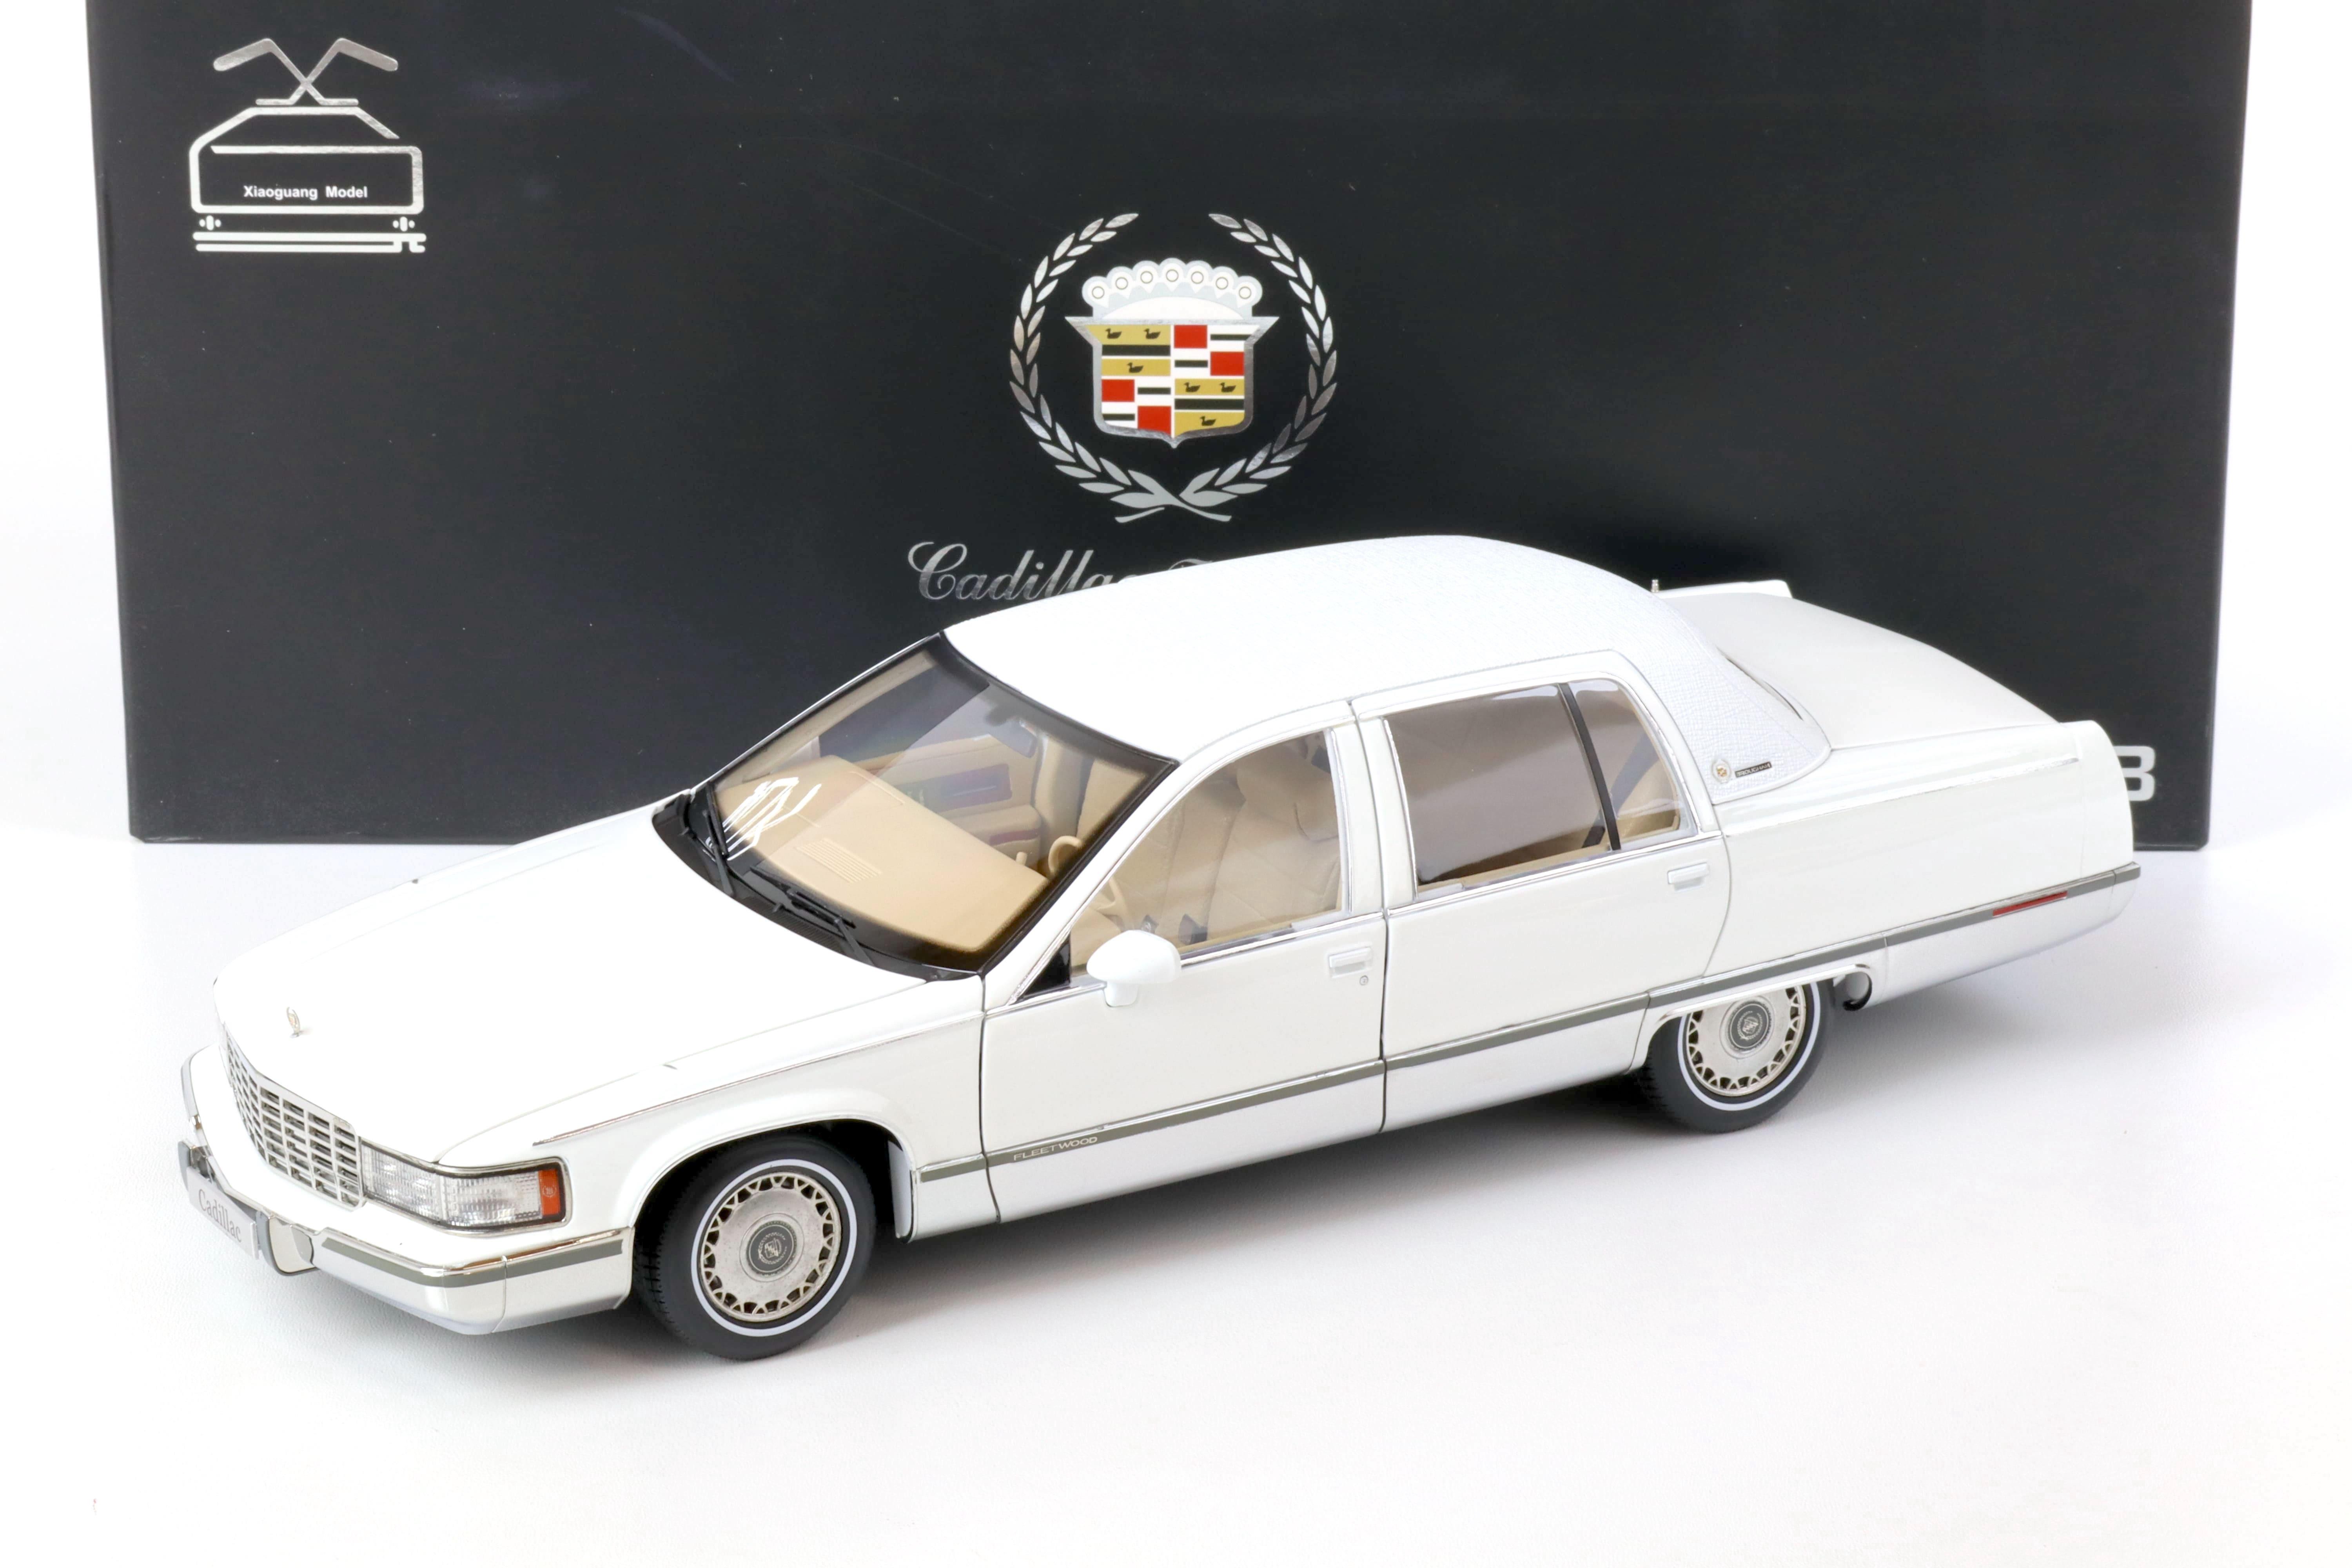 1:18 XiaoGuang Model 1993 Cadillac Fleetwood Brougham Limousine white - leather seats